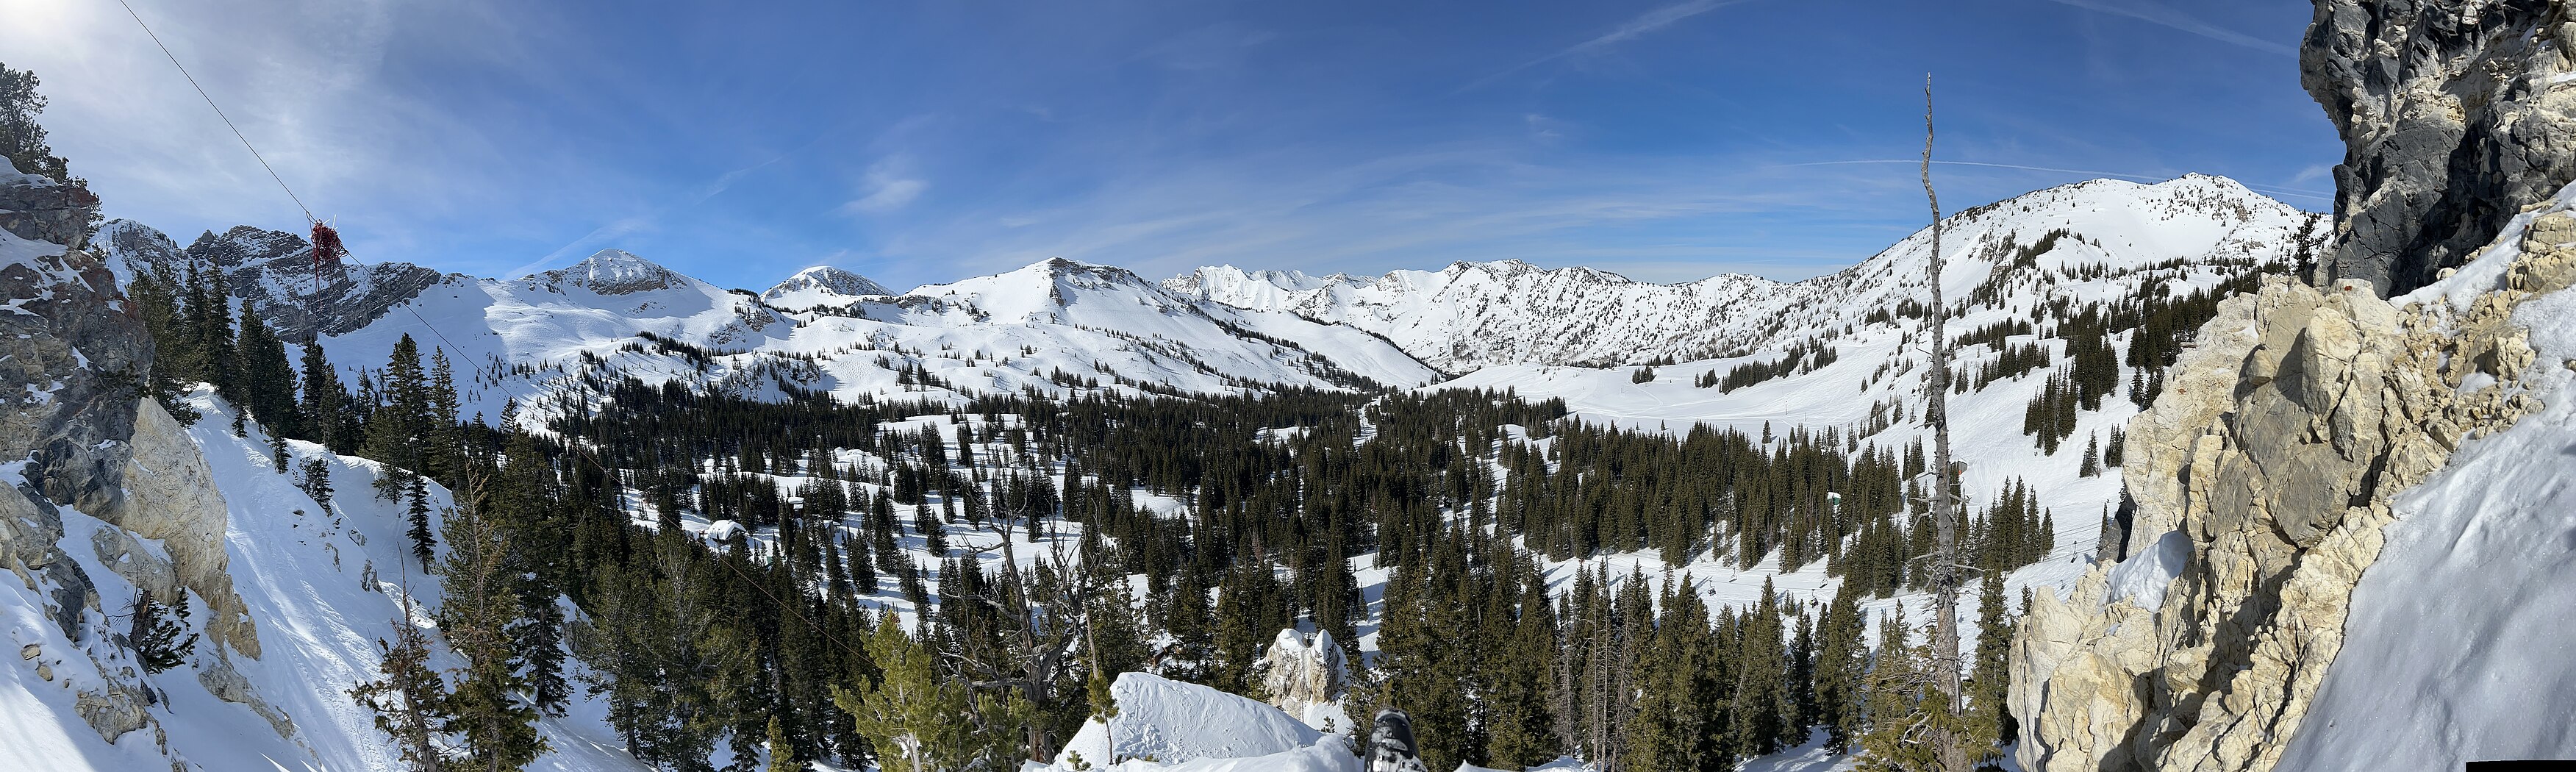 A view of Alta from near White Squaw Area